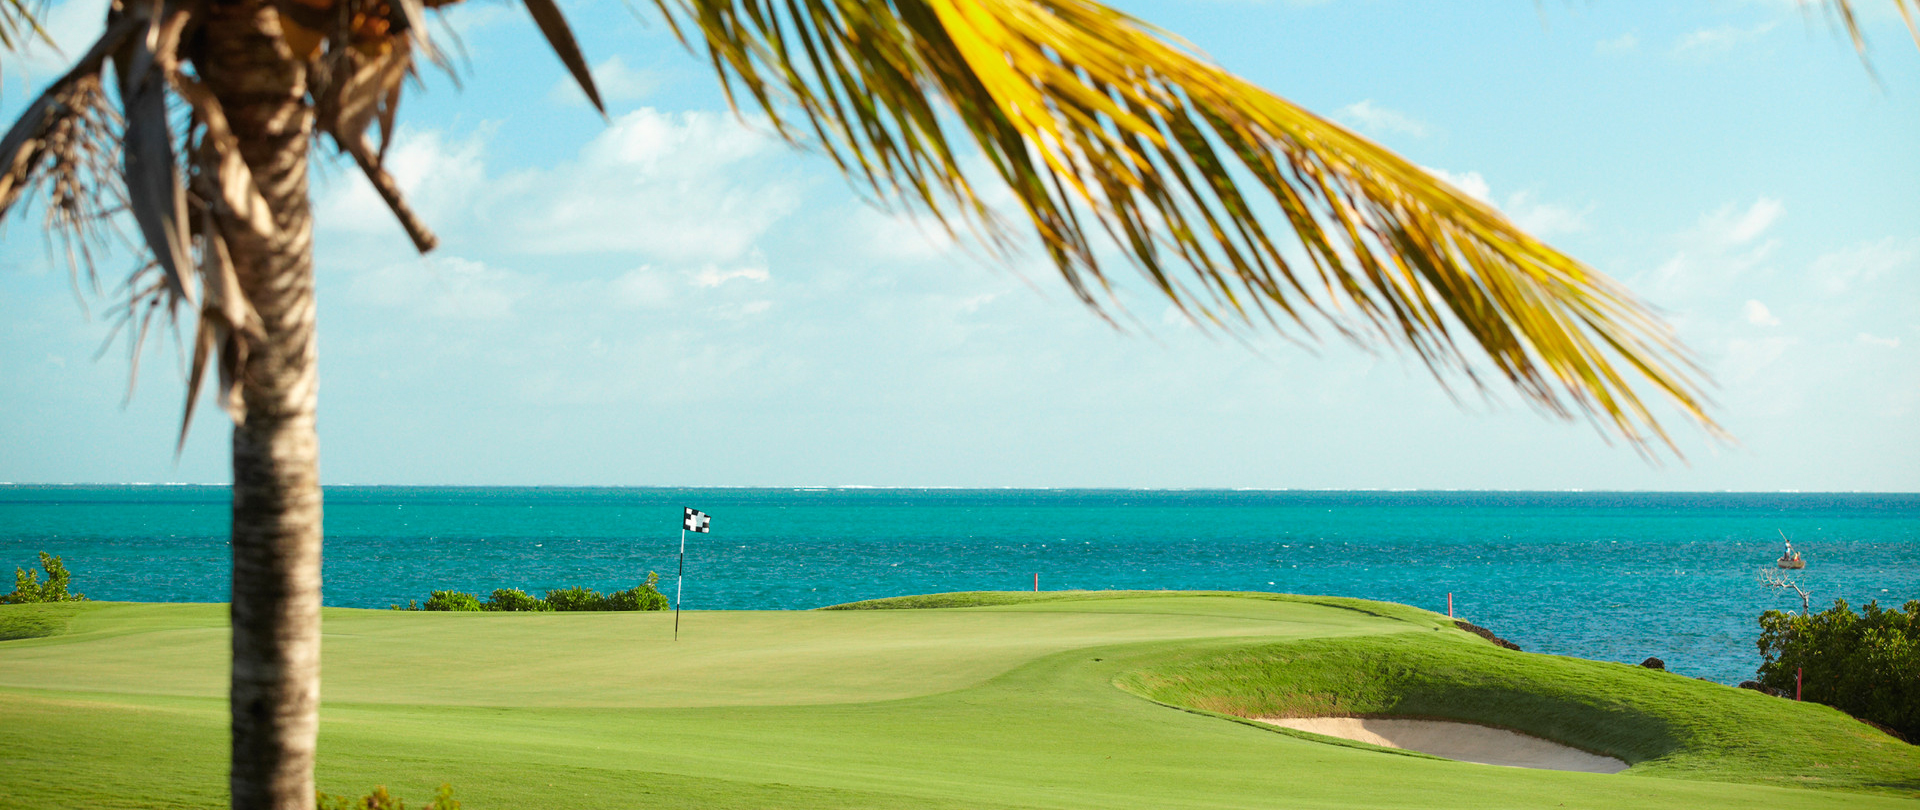 Golfer's Paradise - The Best Golf Resorts in Mauritius